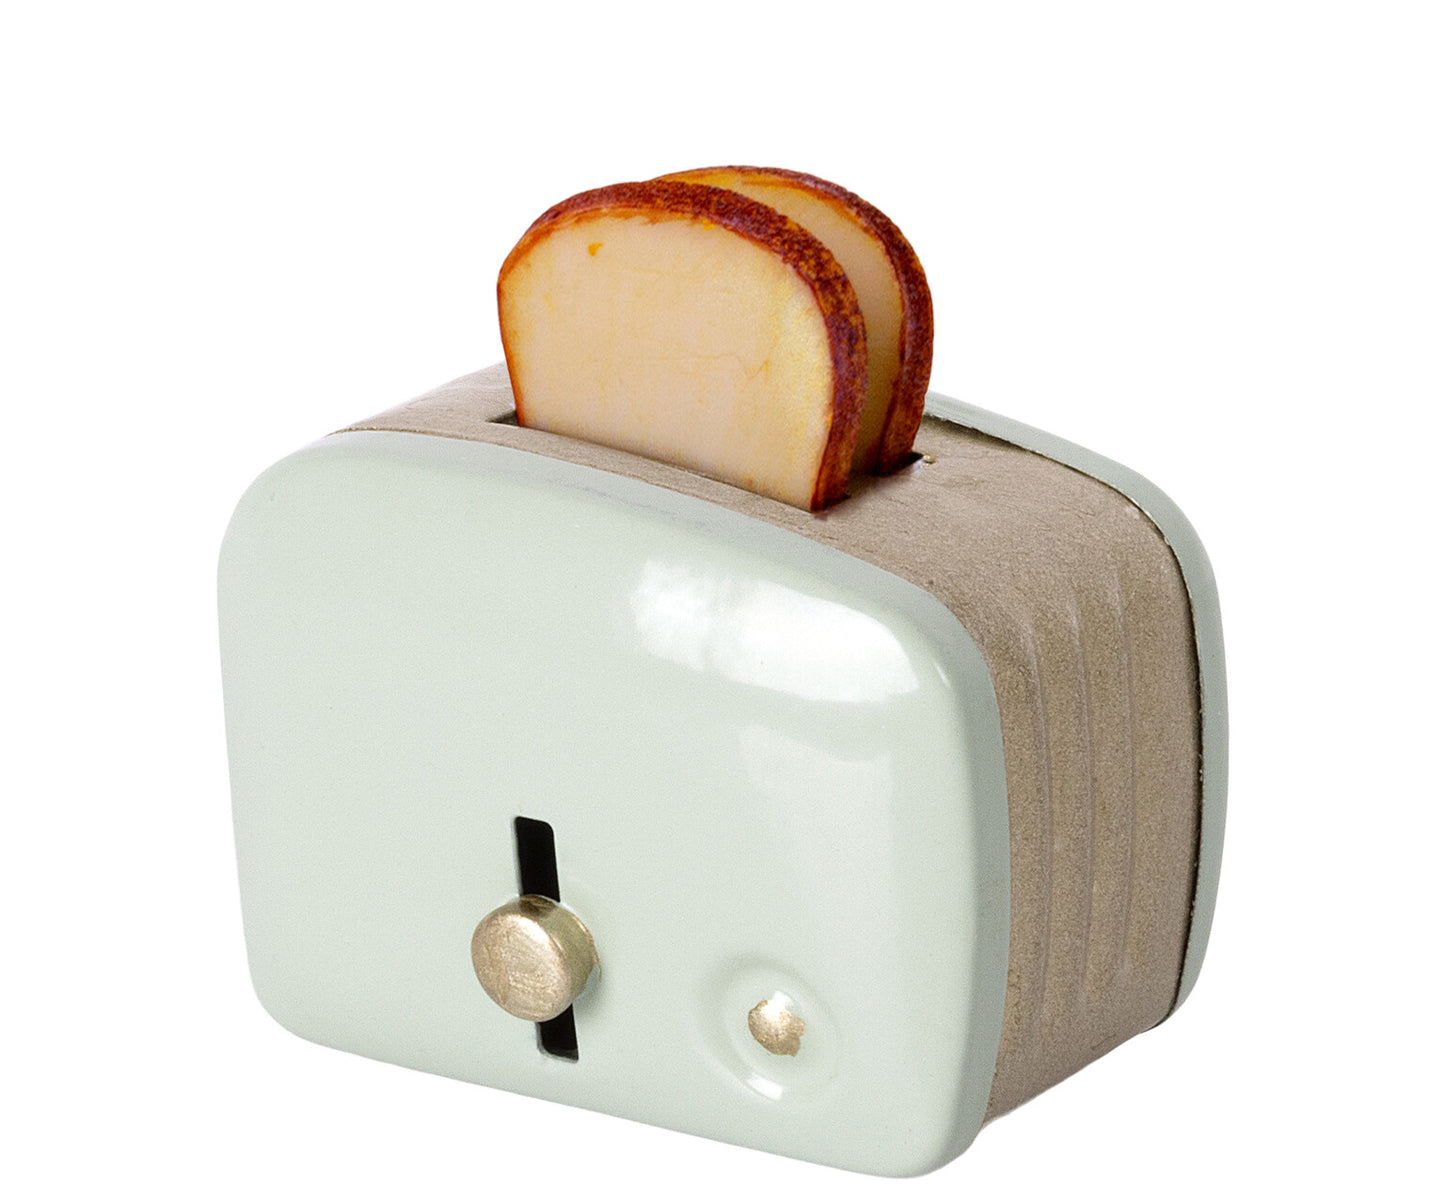 Miniature Toaster and Bread - Mint